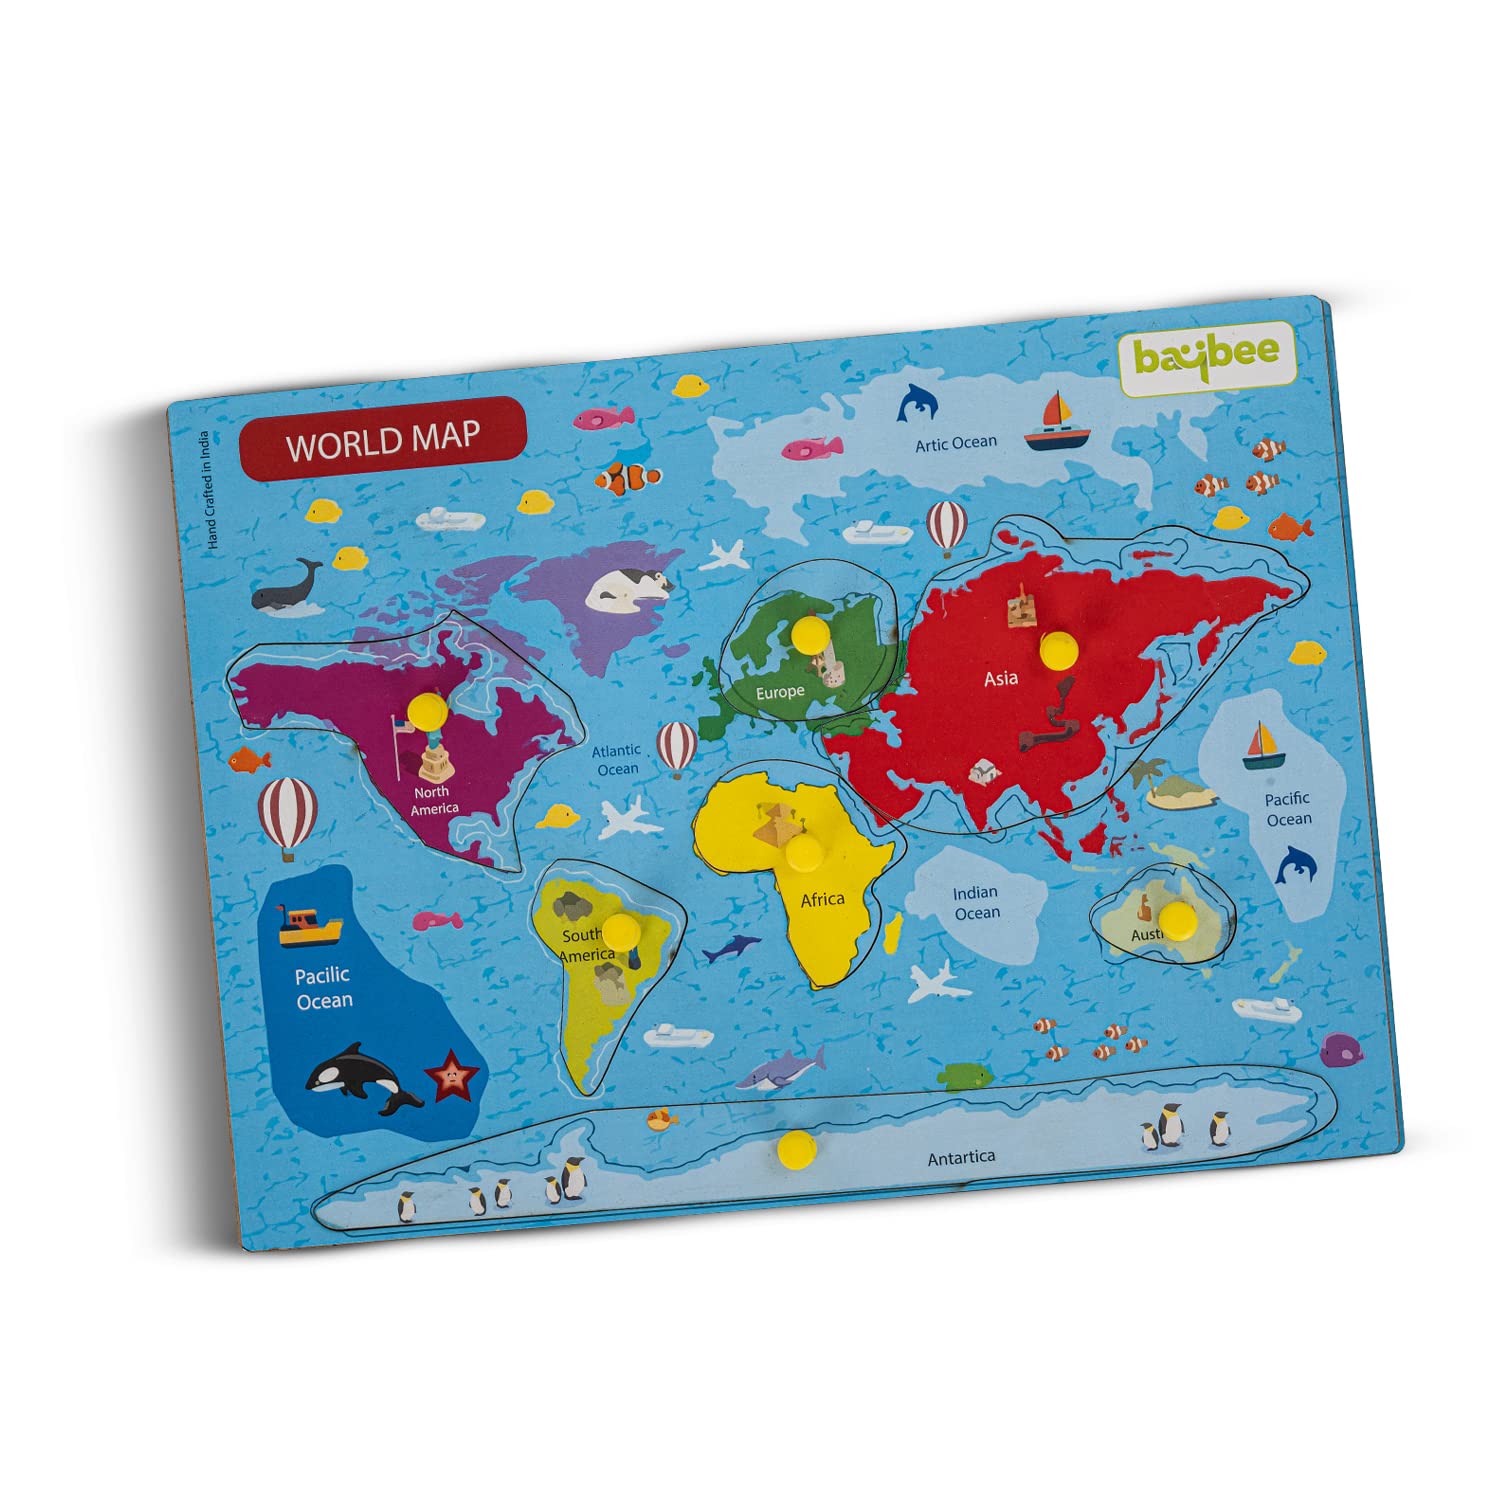 Baybee World Map Continents and Ocean Theme Wooden Puzzle for Kids with Pegs